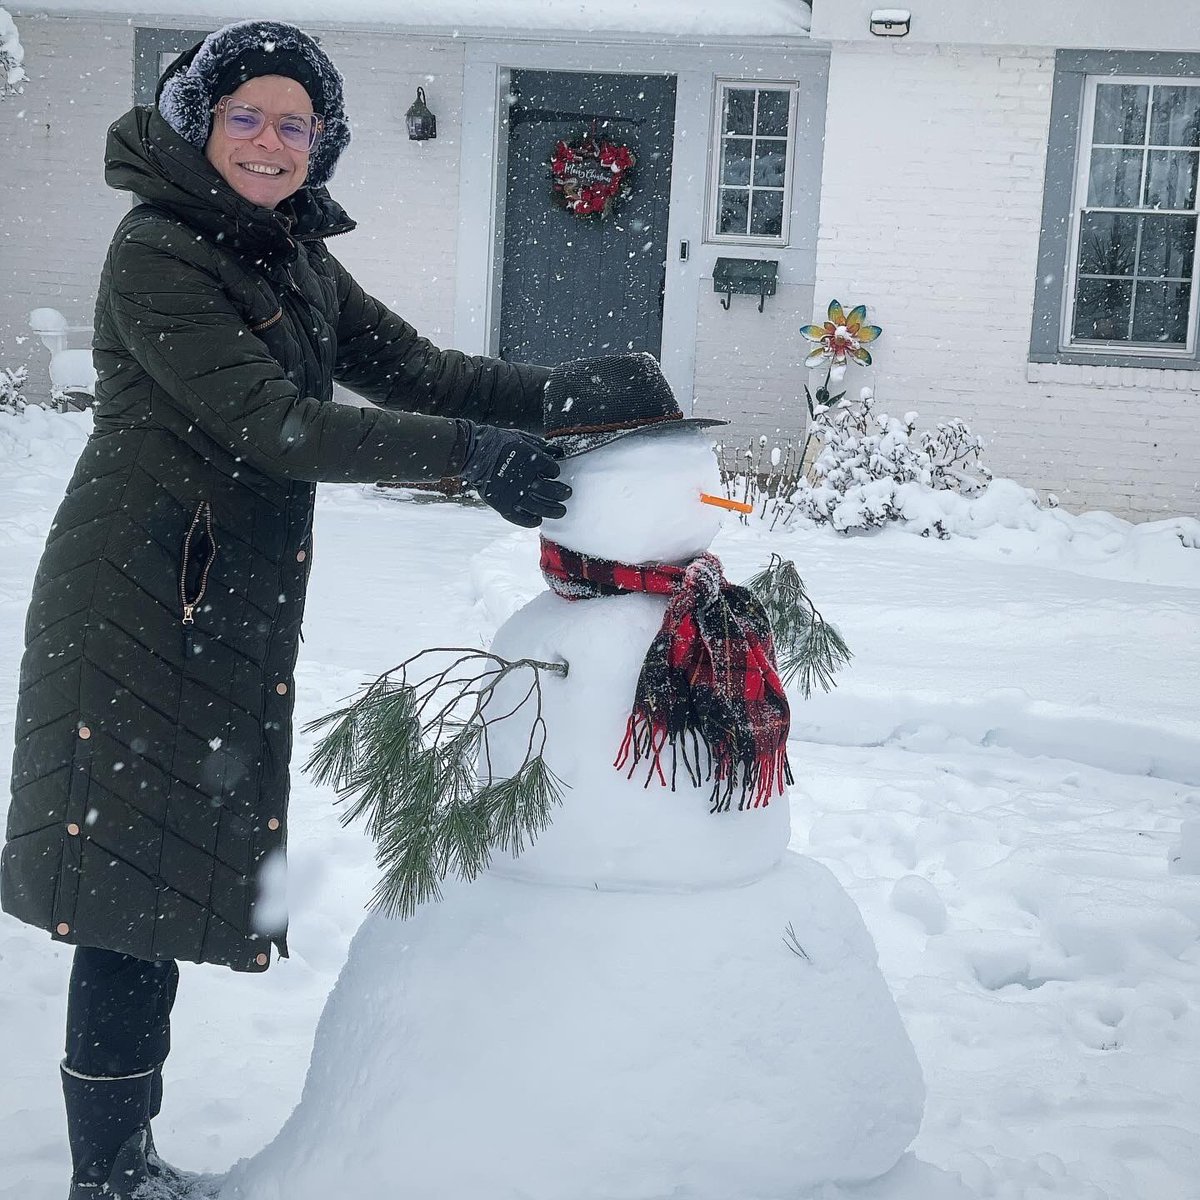 When life gives you snow, build a snowperson ⛄️ This African Islander girl builds her first snow snowperson after decades of enduring winter and snow. If you can’t beat them, out-joy them.